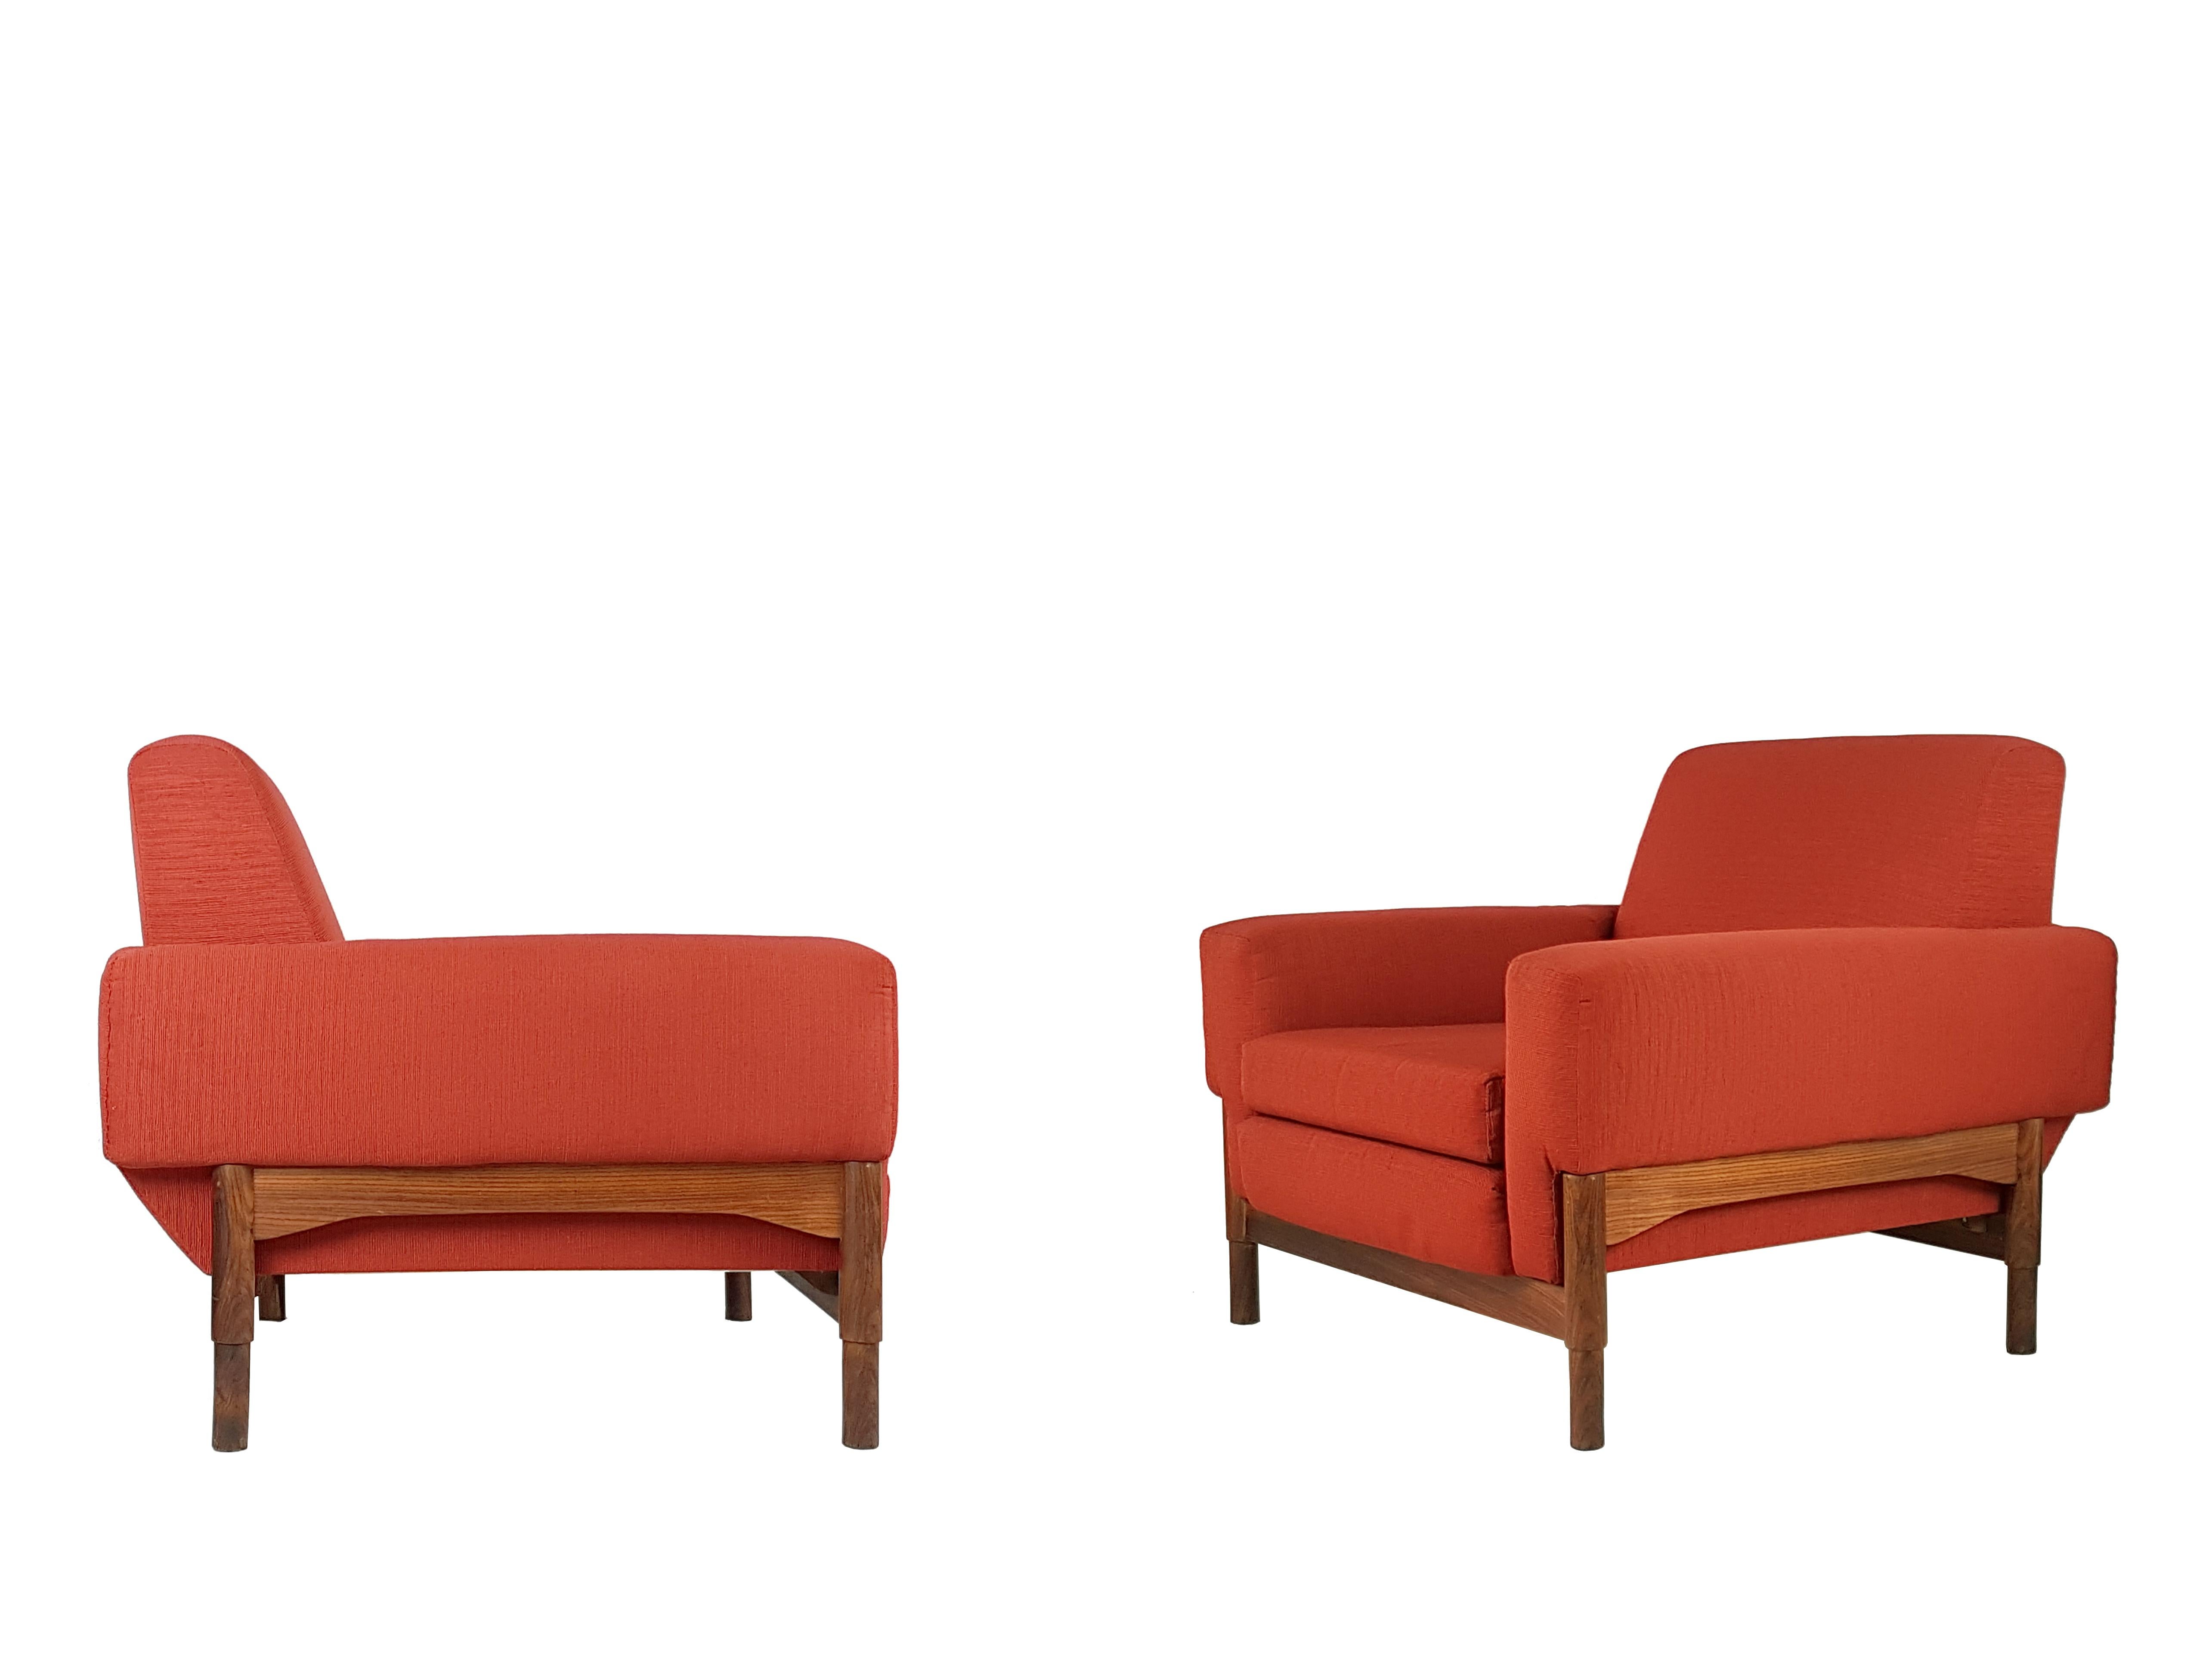 Pair of Wood & Brick Red Fabric 1960 Armchair by S. Saporiti for F.Lli Saporiti For Sale 1